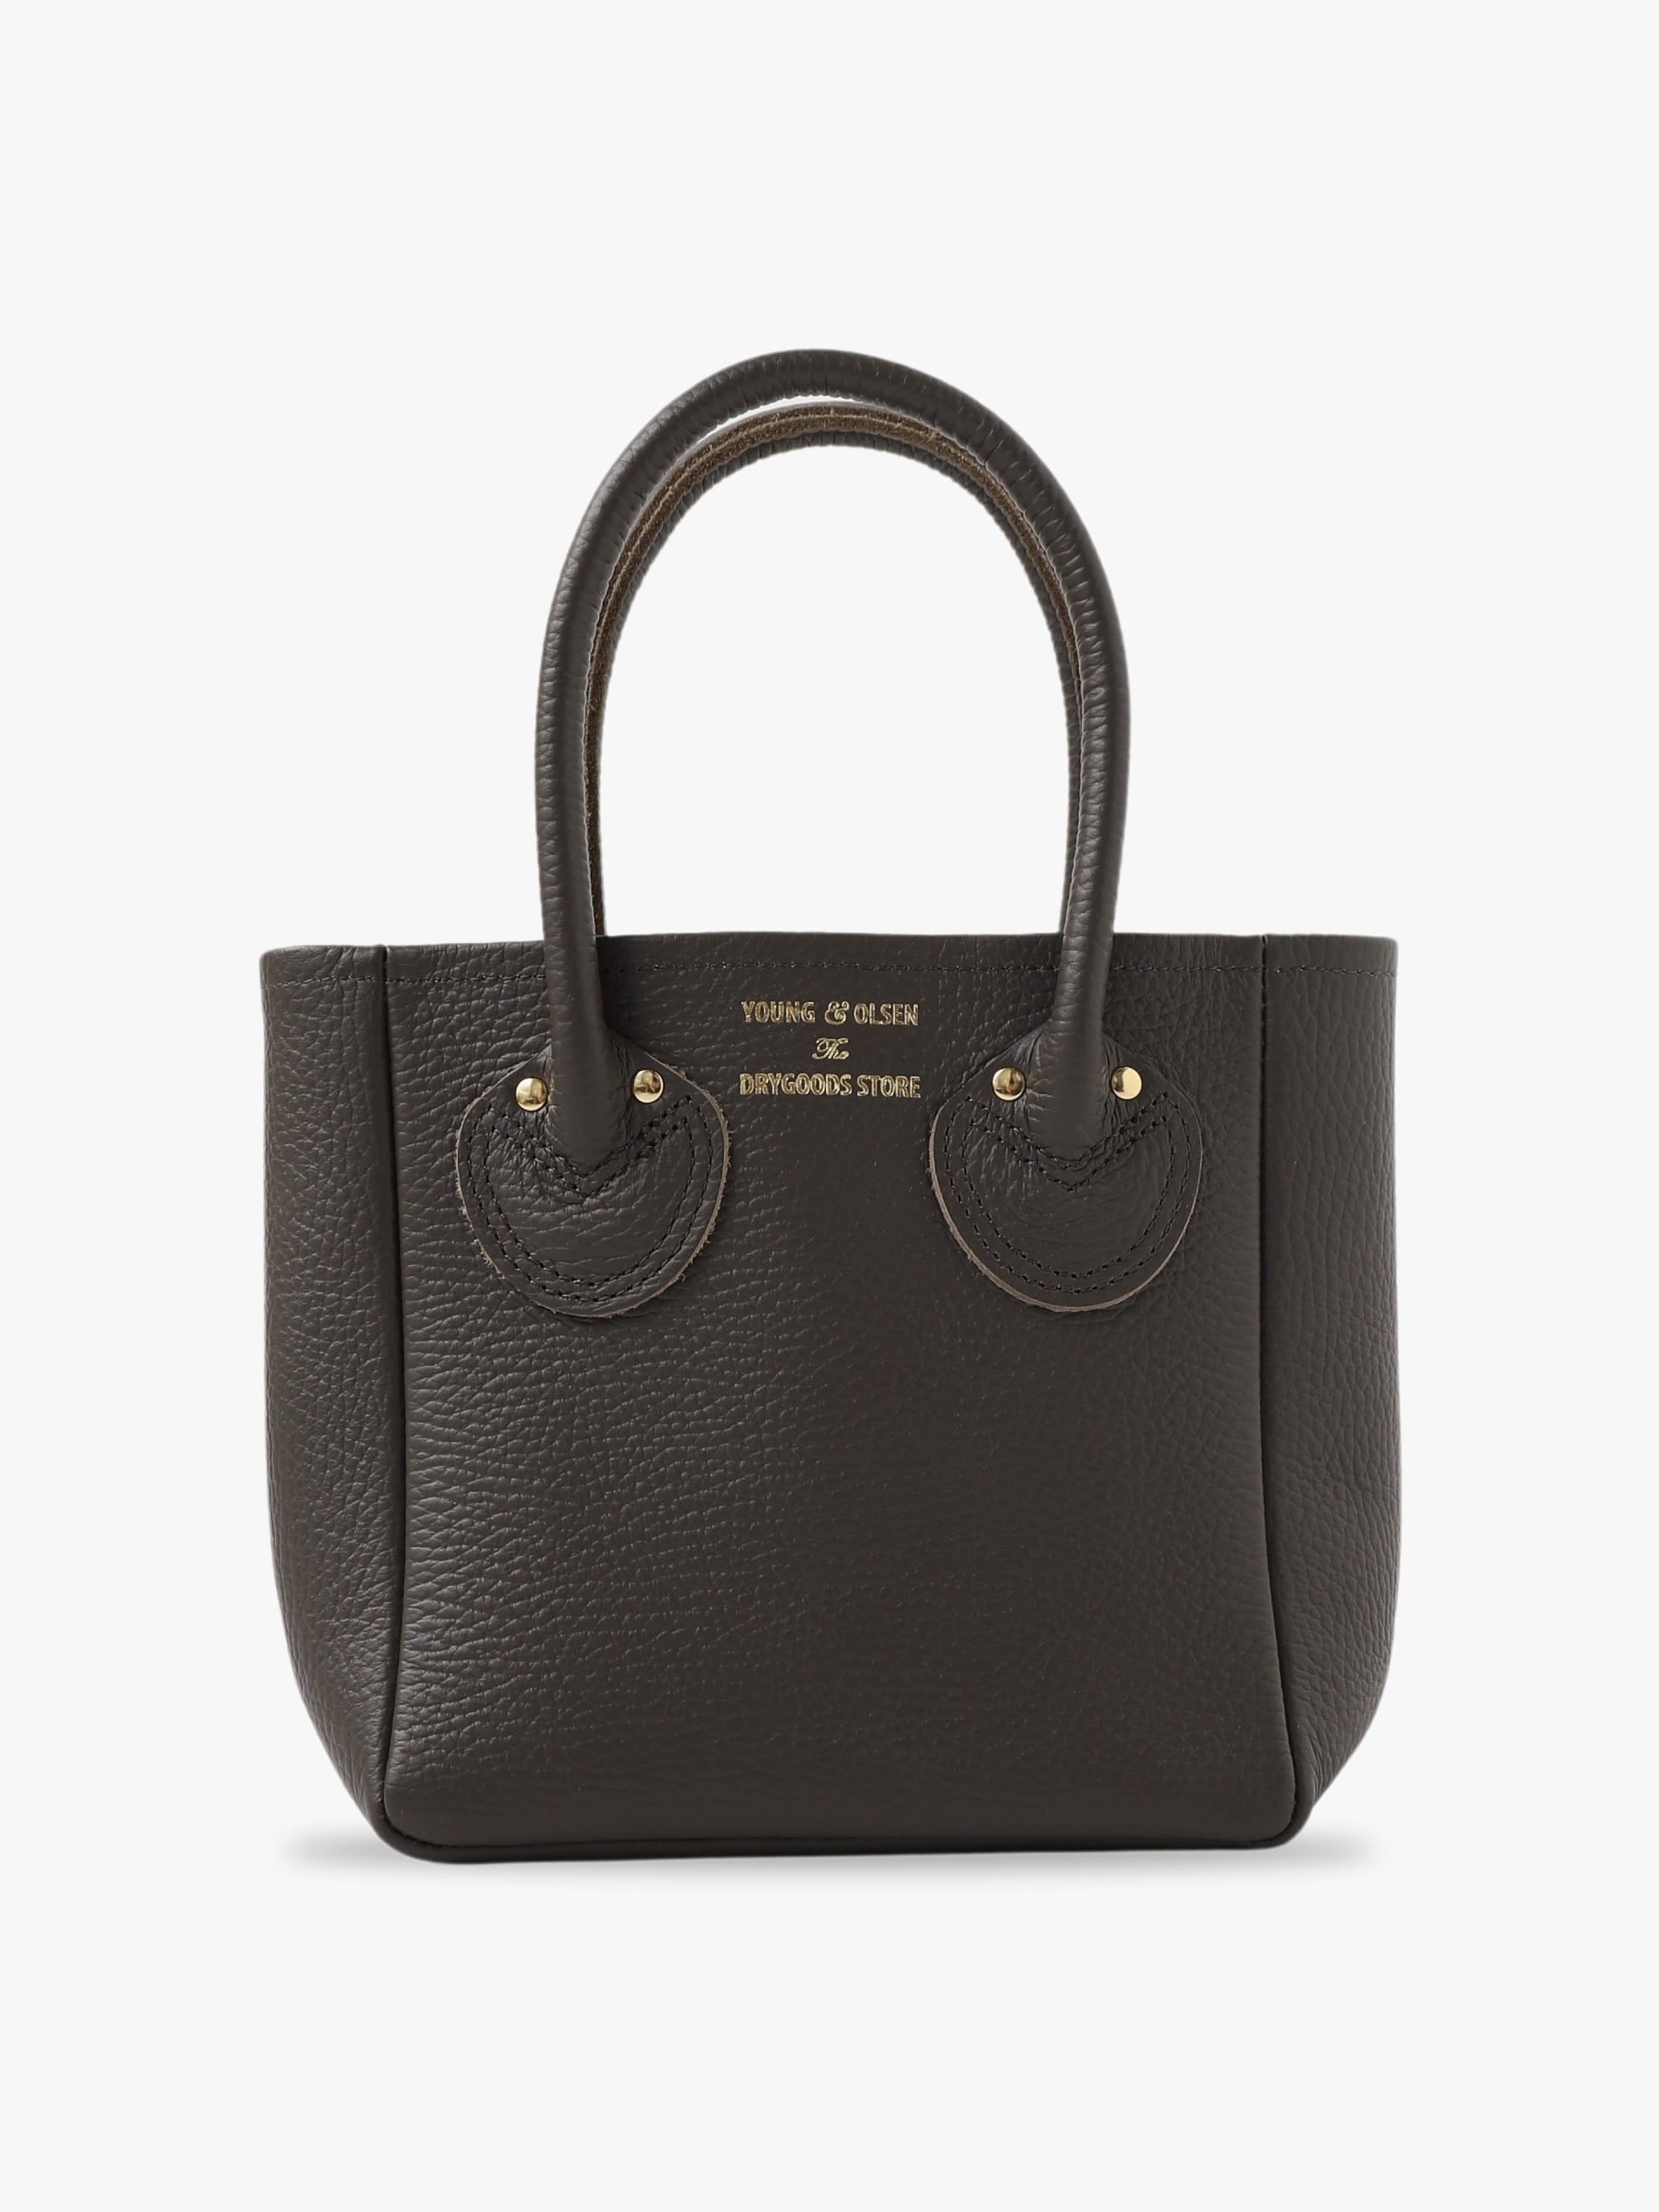 YOUNG &OLSEN/ヤングアンドオルセン EMBOSSED LEATHER TOTE BAGXS ...